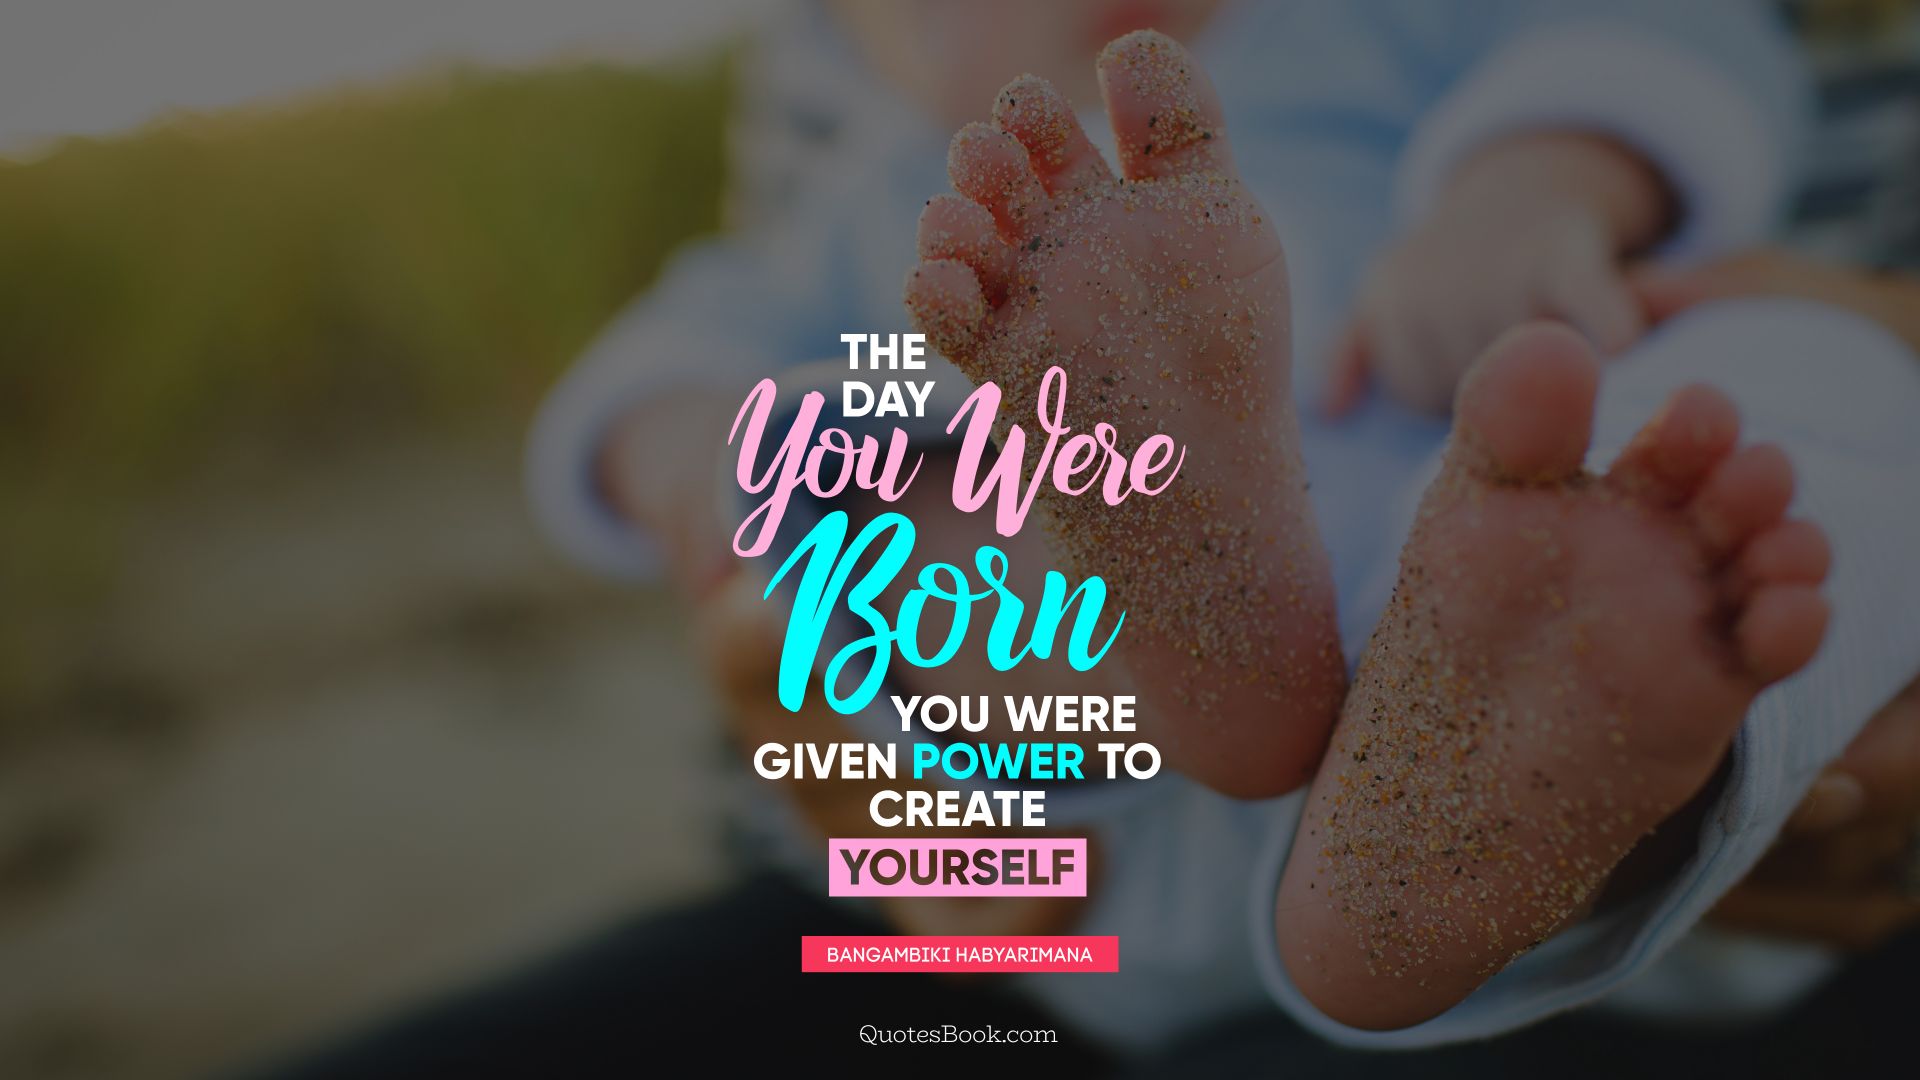 The day you were born you were given power to create yourself. - Quote by Bangambiki Habyarimana